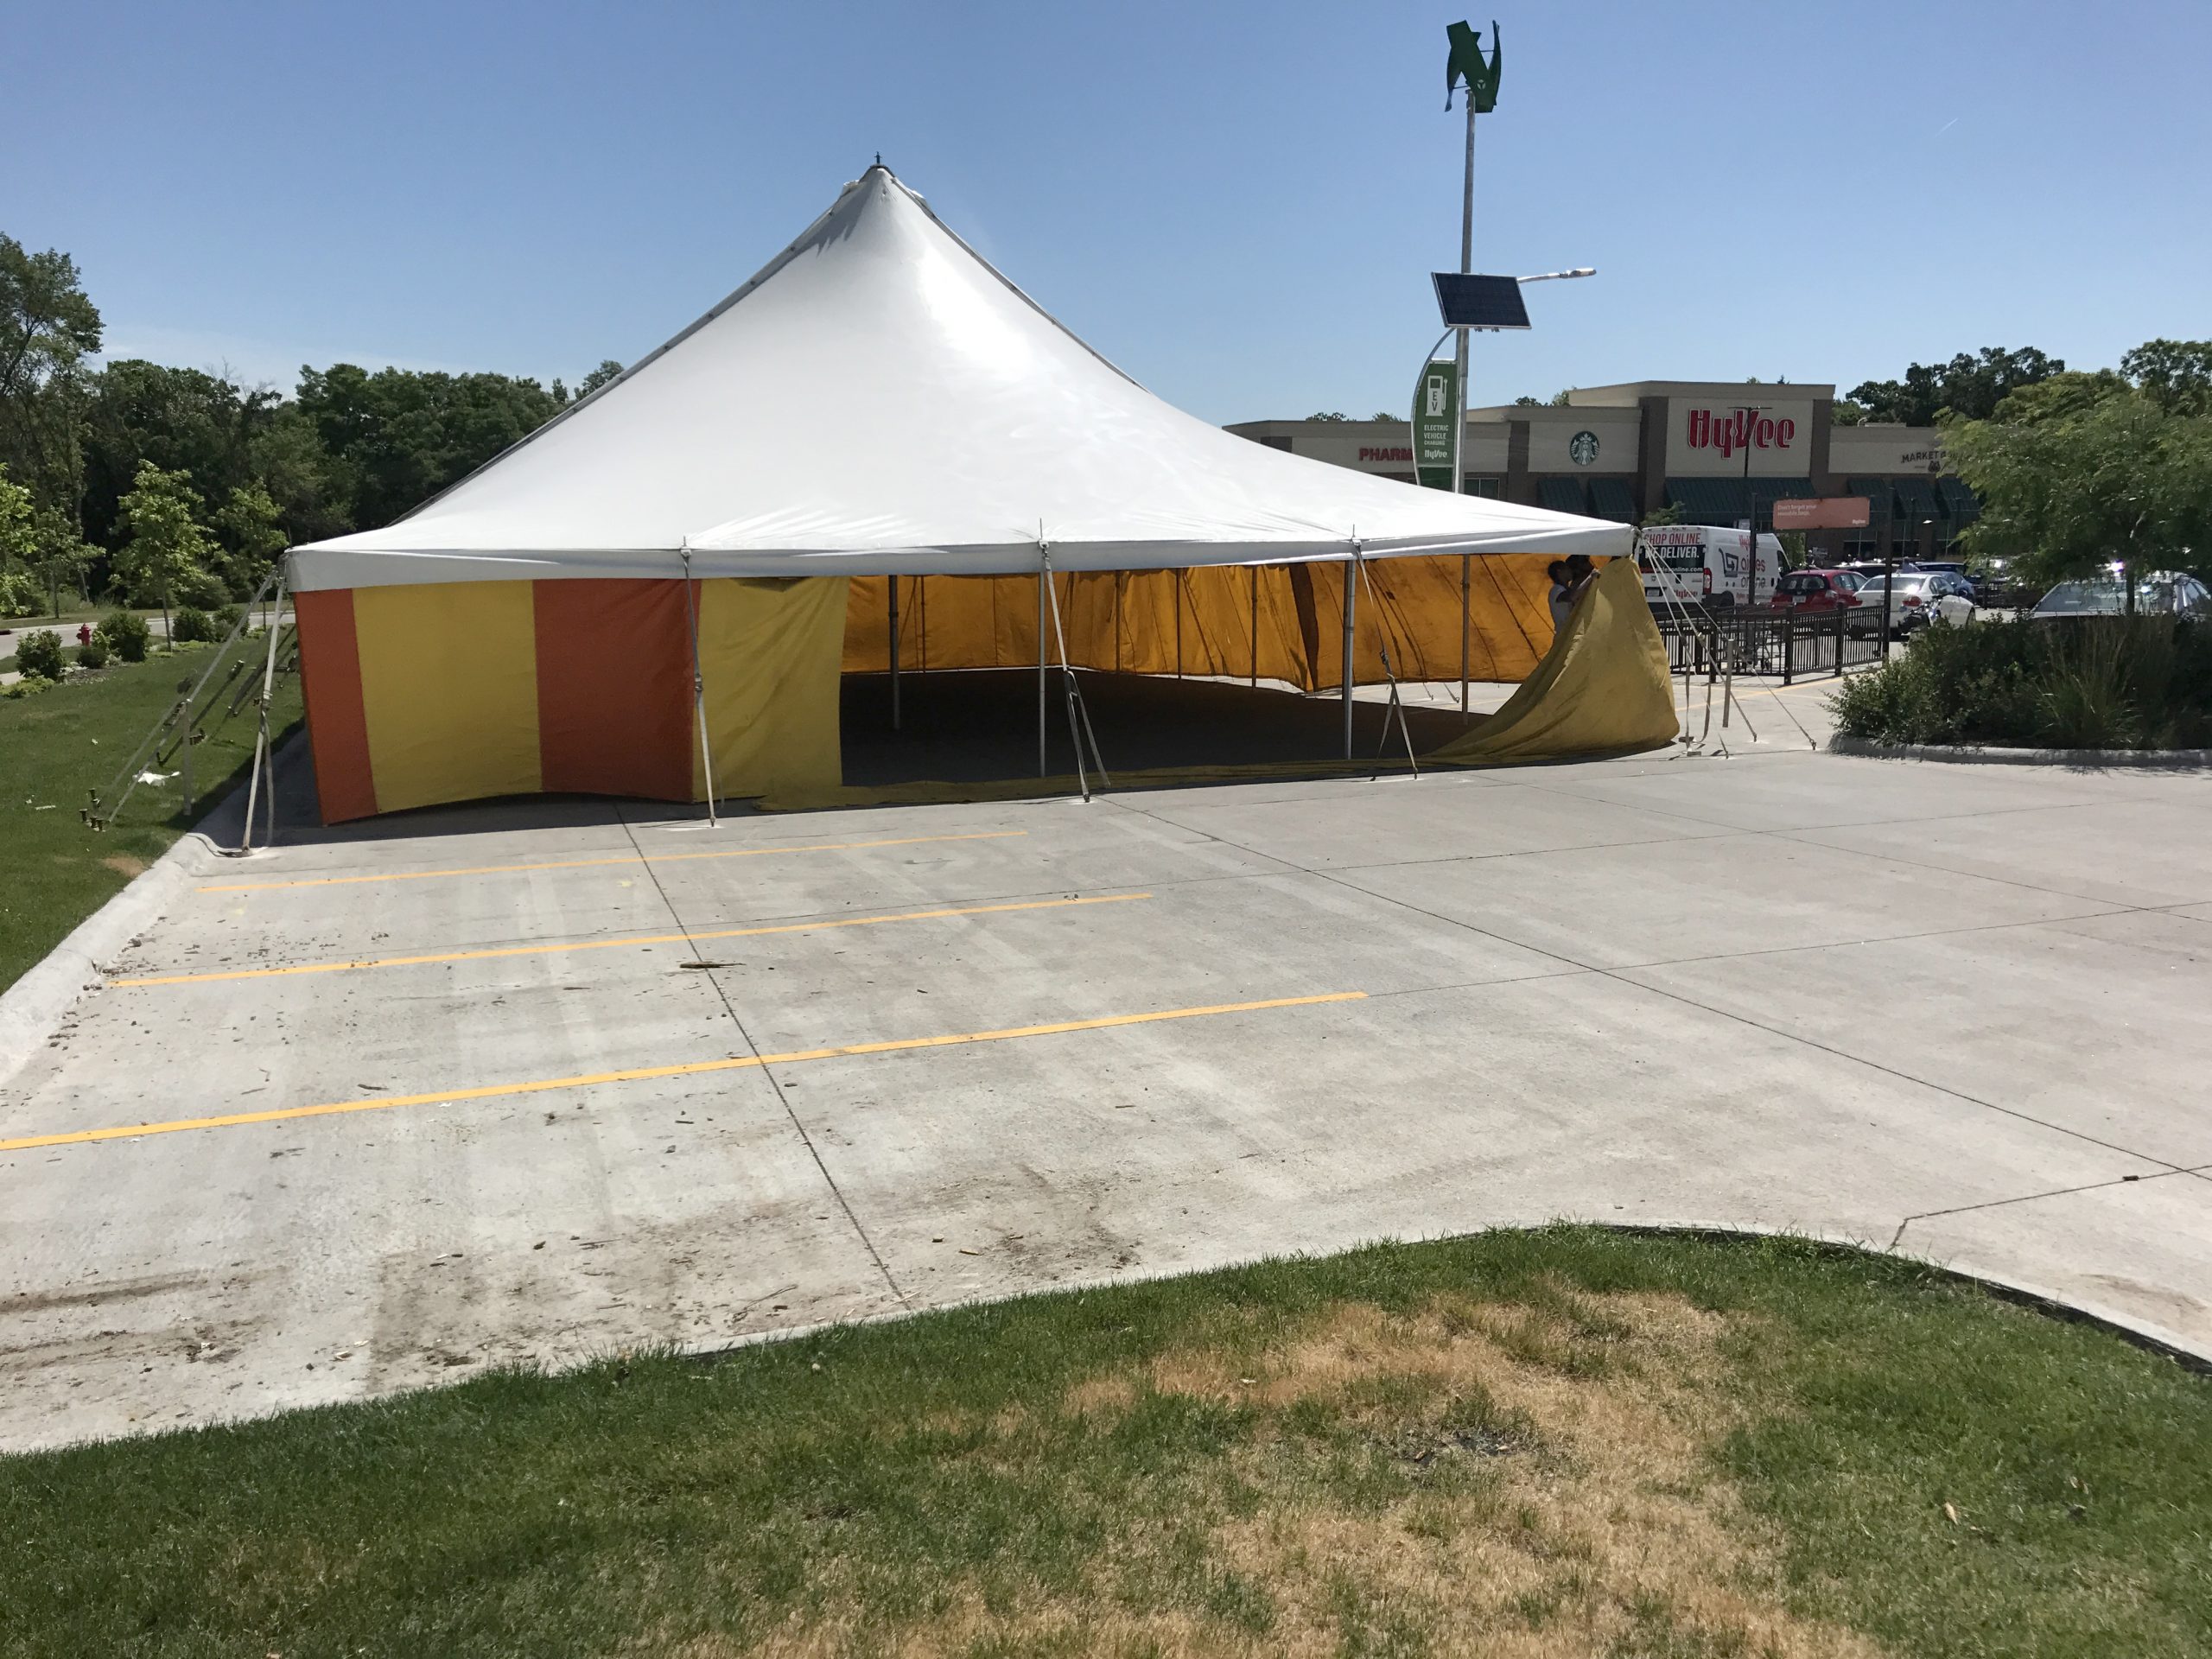 40' x 60' rope and pole fireworks tent at HyVee in Iowa City for Bellino Fireworks